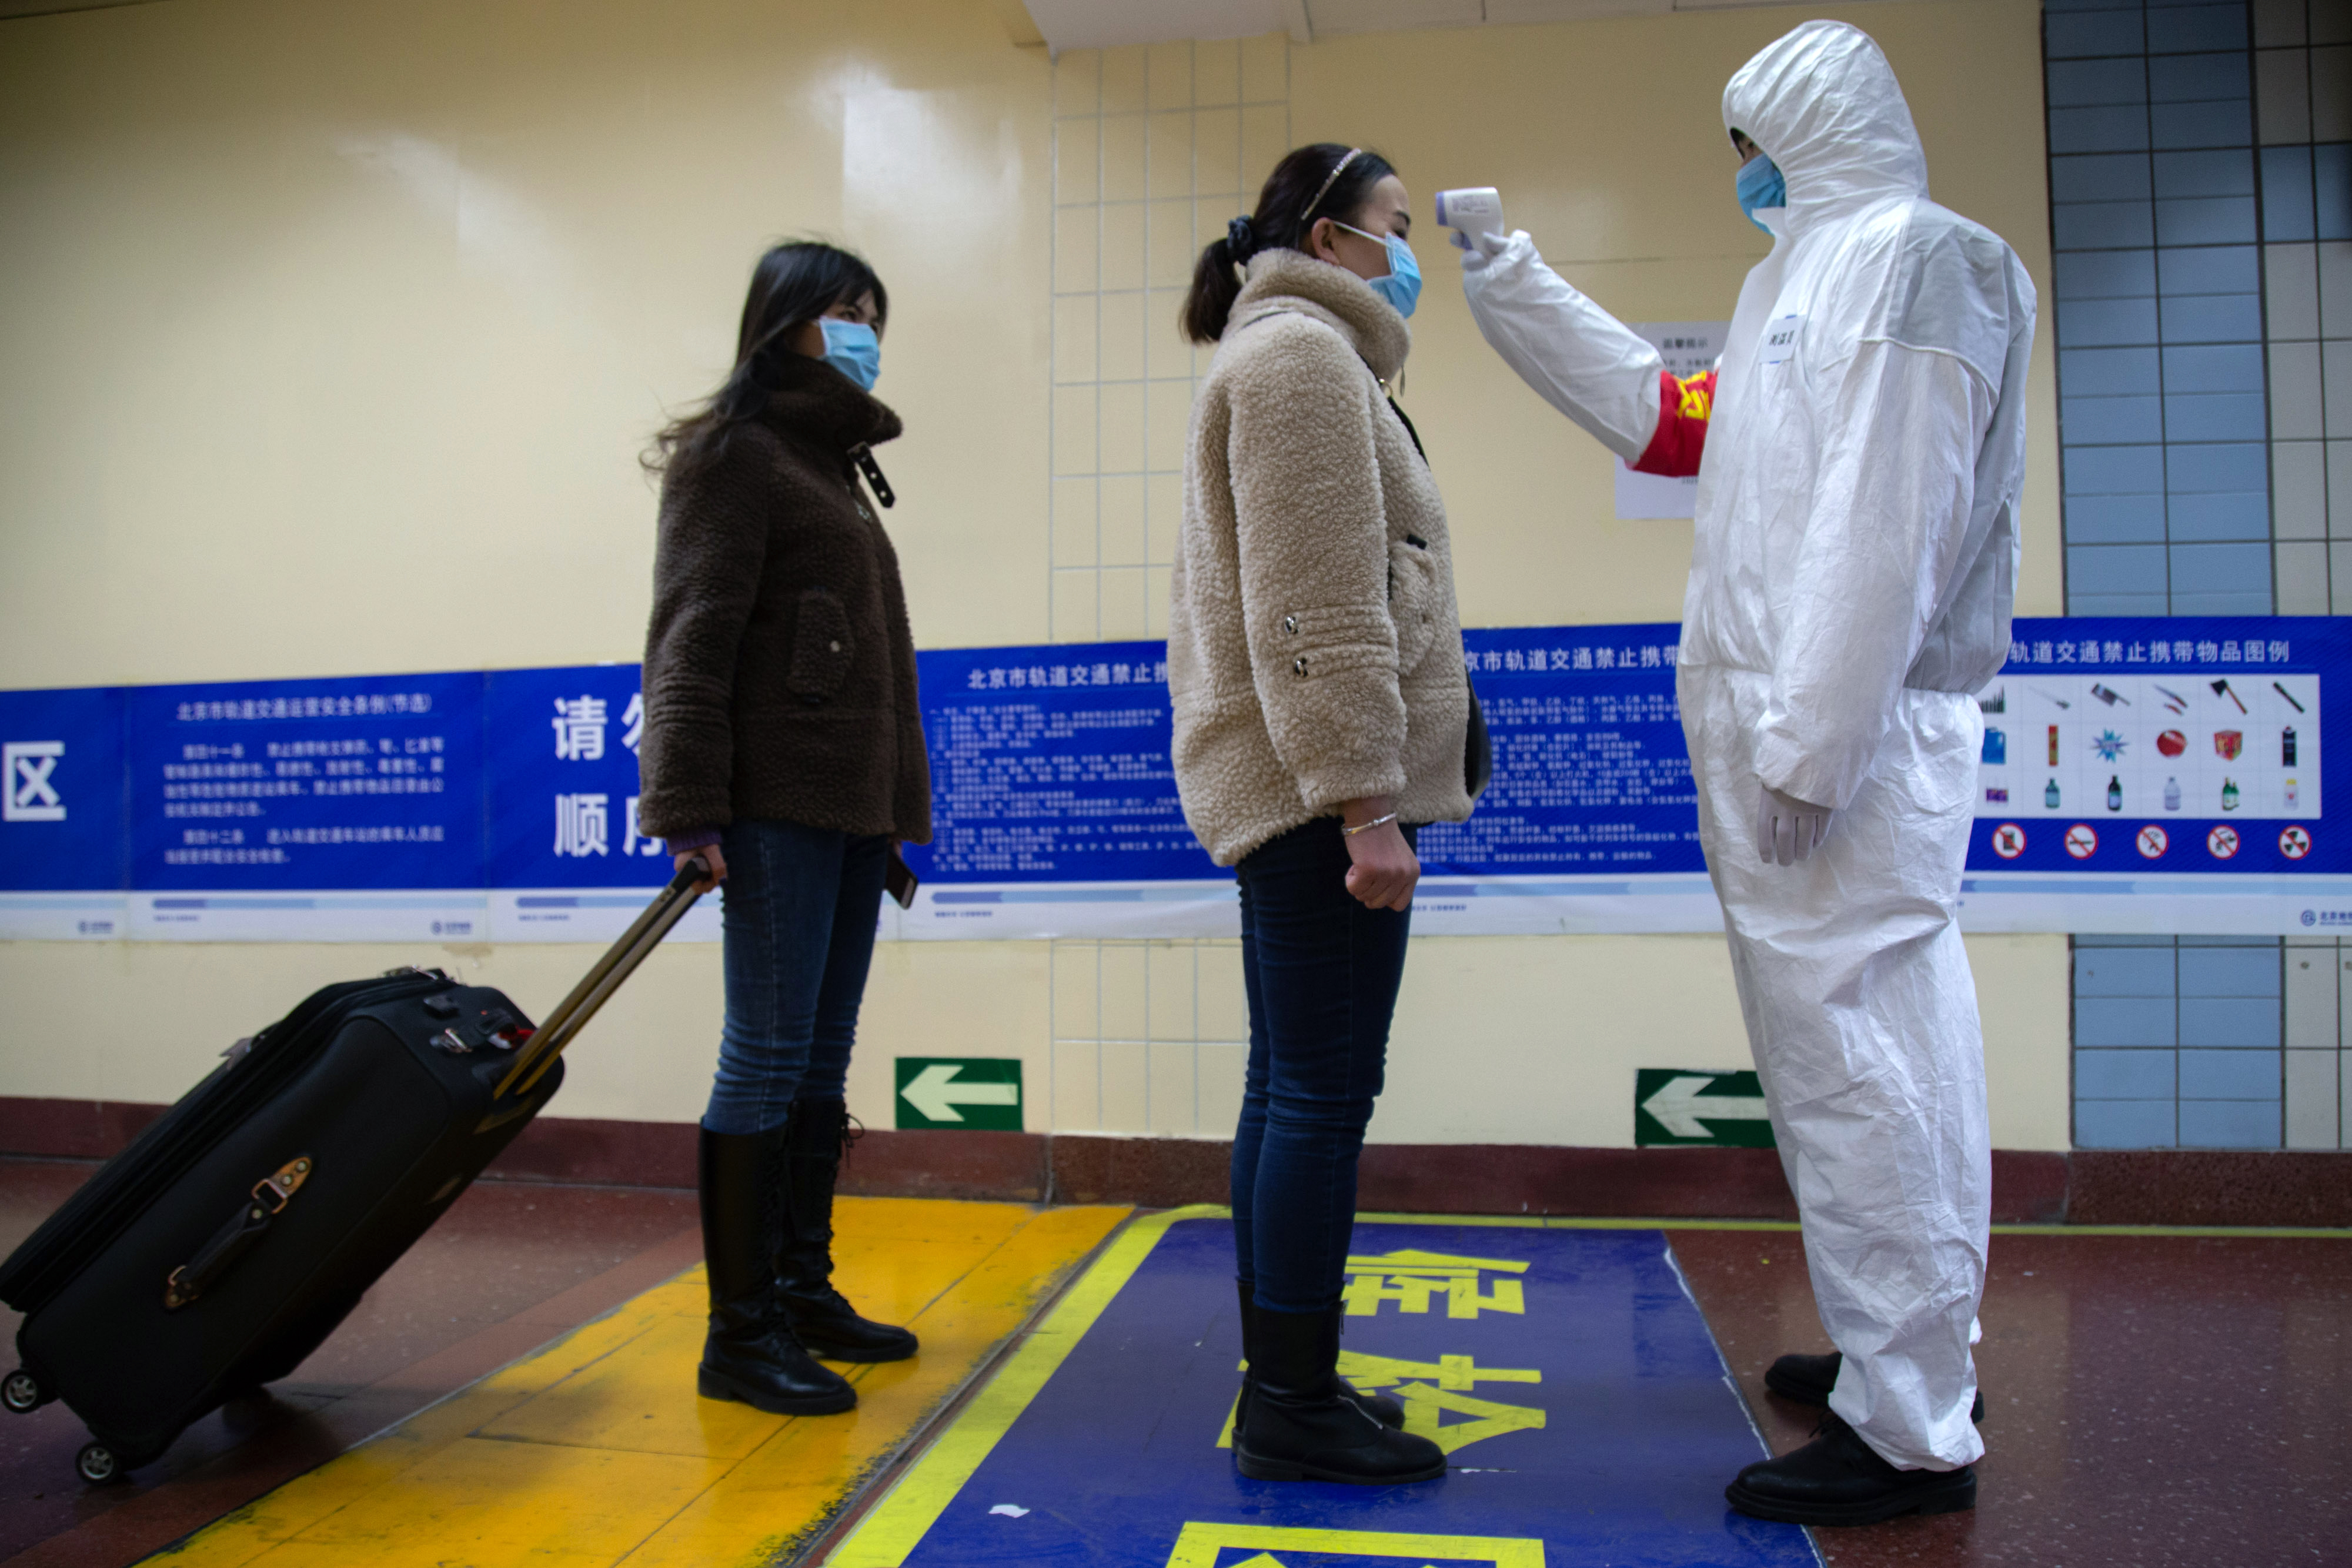 BEIJING, CHINA - JANUARY 26: A health worker checks the temperature of women entering the subway on January 26, 2020 in Beijing, China. The number of cases of coronavirus rose to 1,975 in mainland China on Sunday. Authorities tightened restrictions on travel and tourism this weekend after putting Wuhan, the capital of Hubei province, under quarantine on Thursday. The spread of the virus corresponds with the first days of the Spring Festival, which is one of the biggest domestic travel weeks of the year in China. Popular tourism landmarks in Beijing including the Forbidden City, Badaling Great Wall, and The Palace Museum were closed to the public starting Saturday. The Beijing Municipal Education Commission announced it will delay reopening schools from kindergarten to university. The death toll on Sunday rose to 56. The majority of fatalities are in Wuhan where the first cases of the virus were reported last month.(Photo by Betsy Joles/Getty Images)